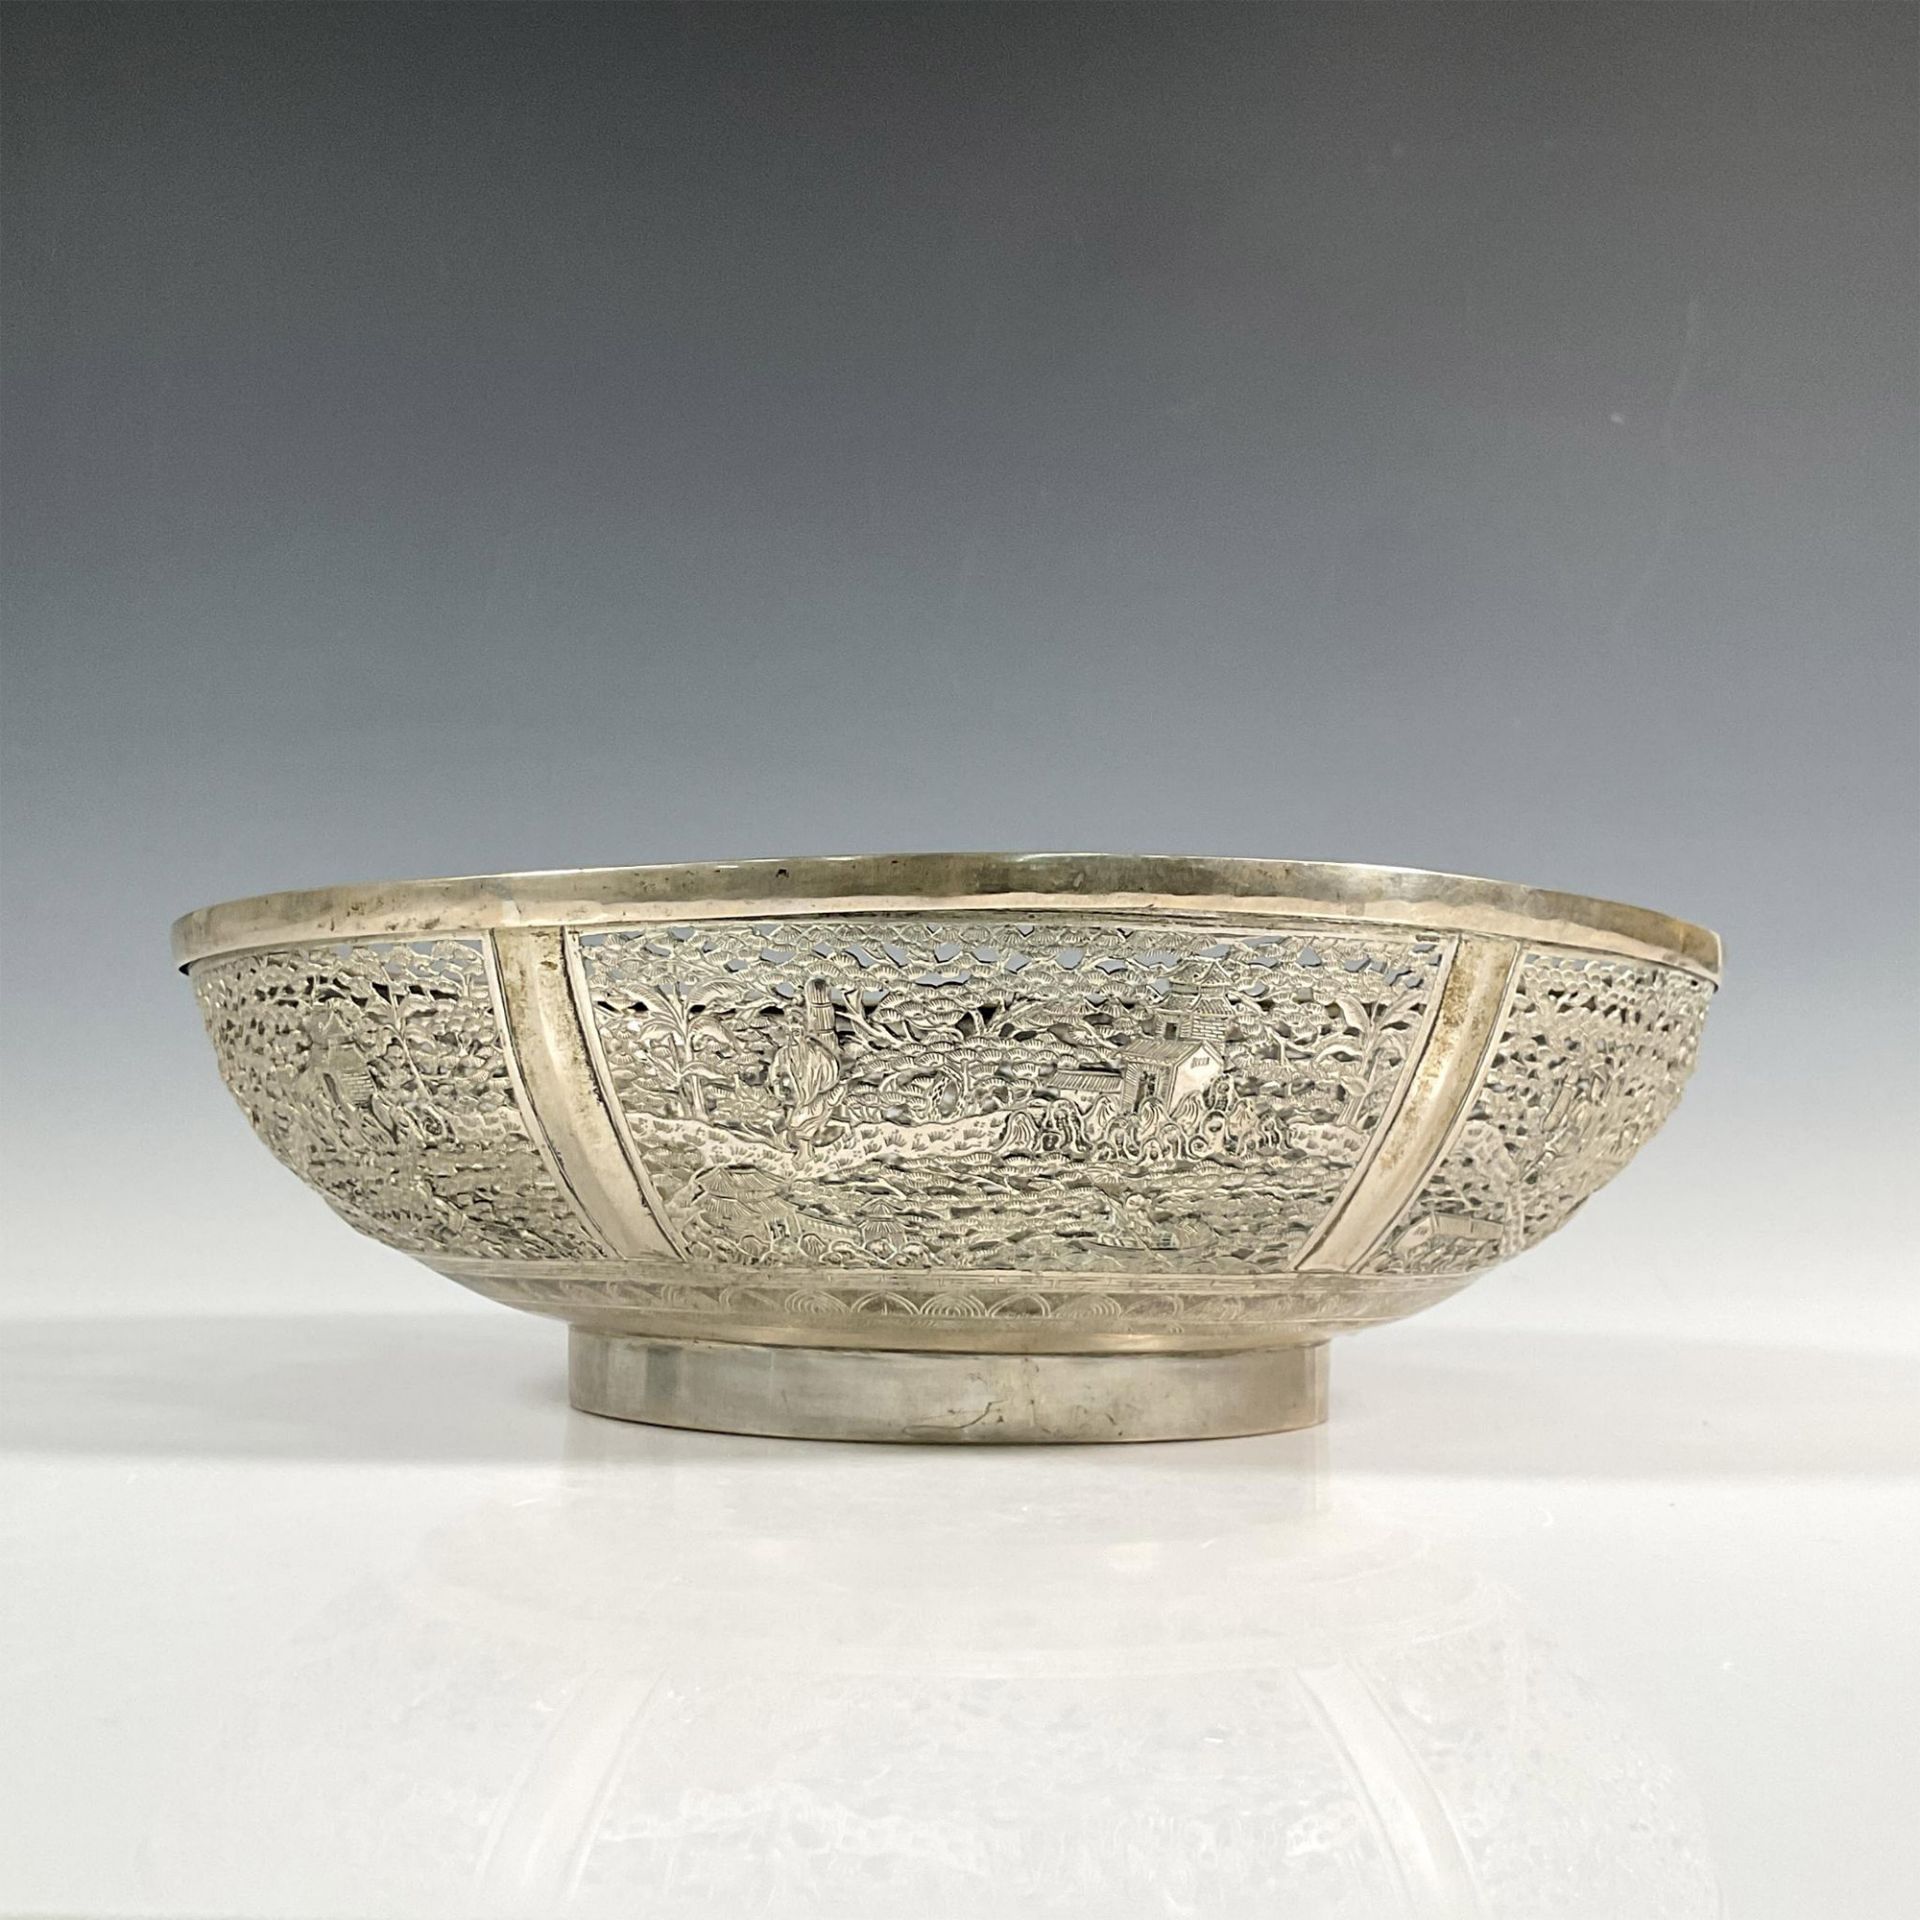 Asian Silver Decorative Pierced Bowl - Image 4 of 6